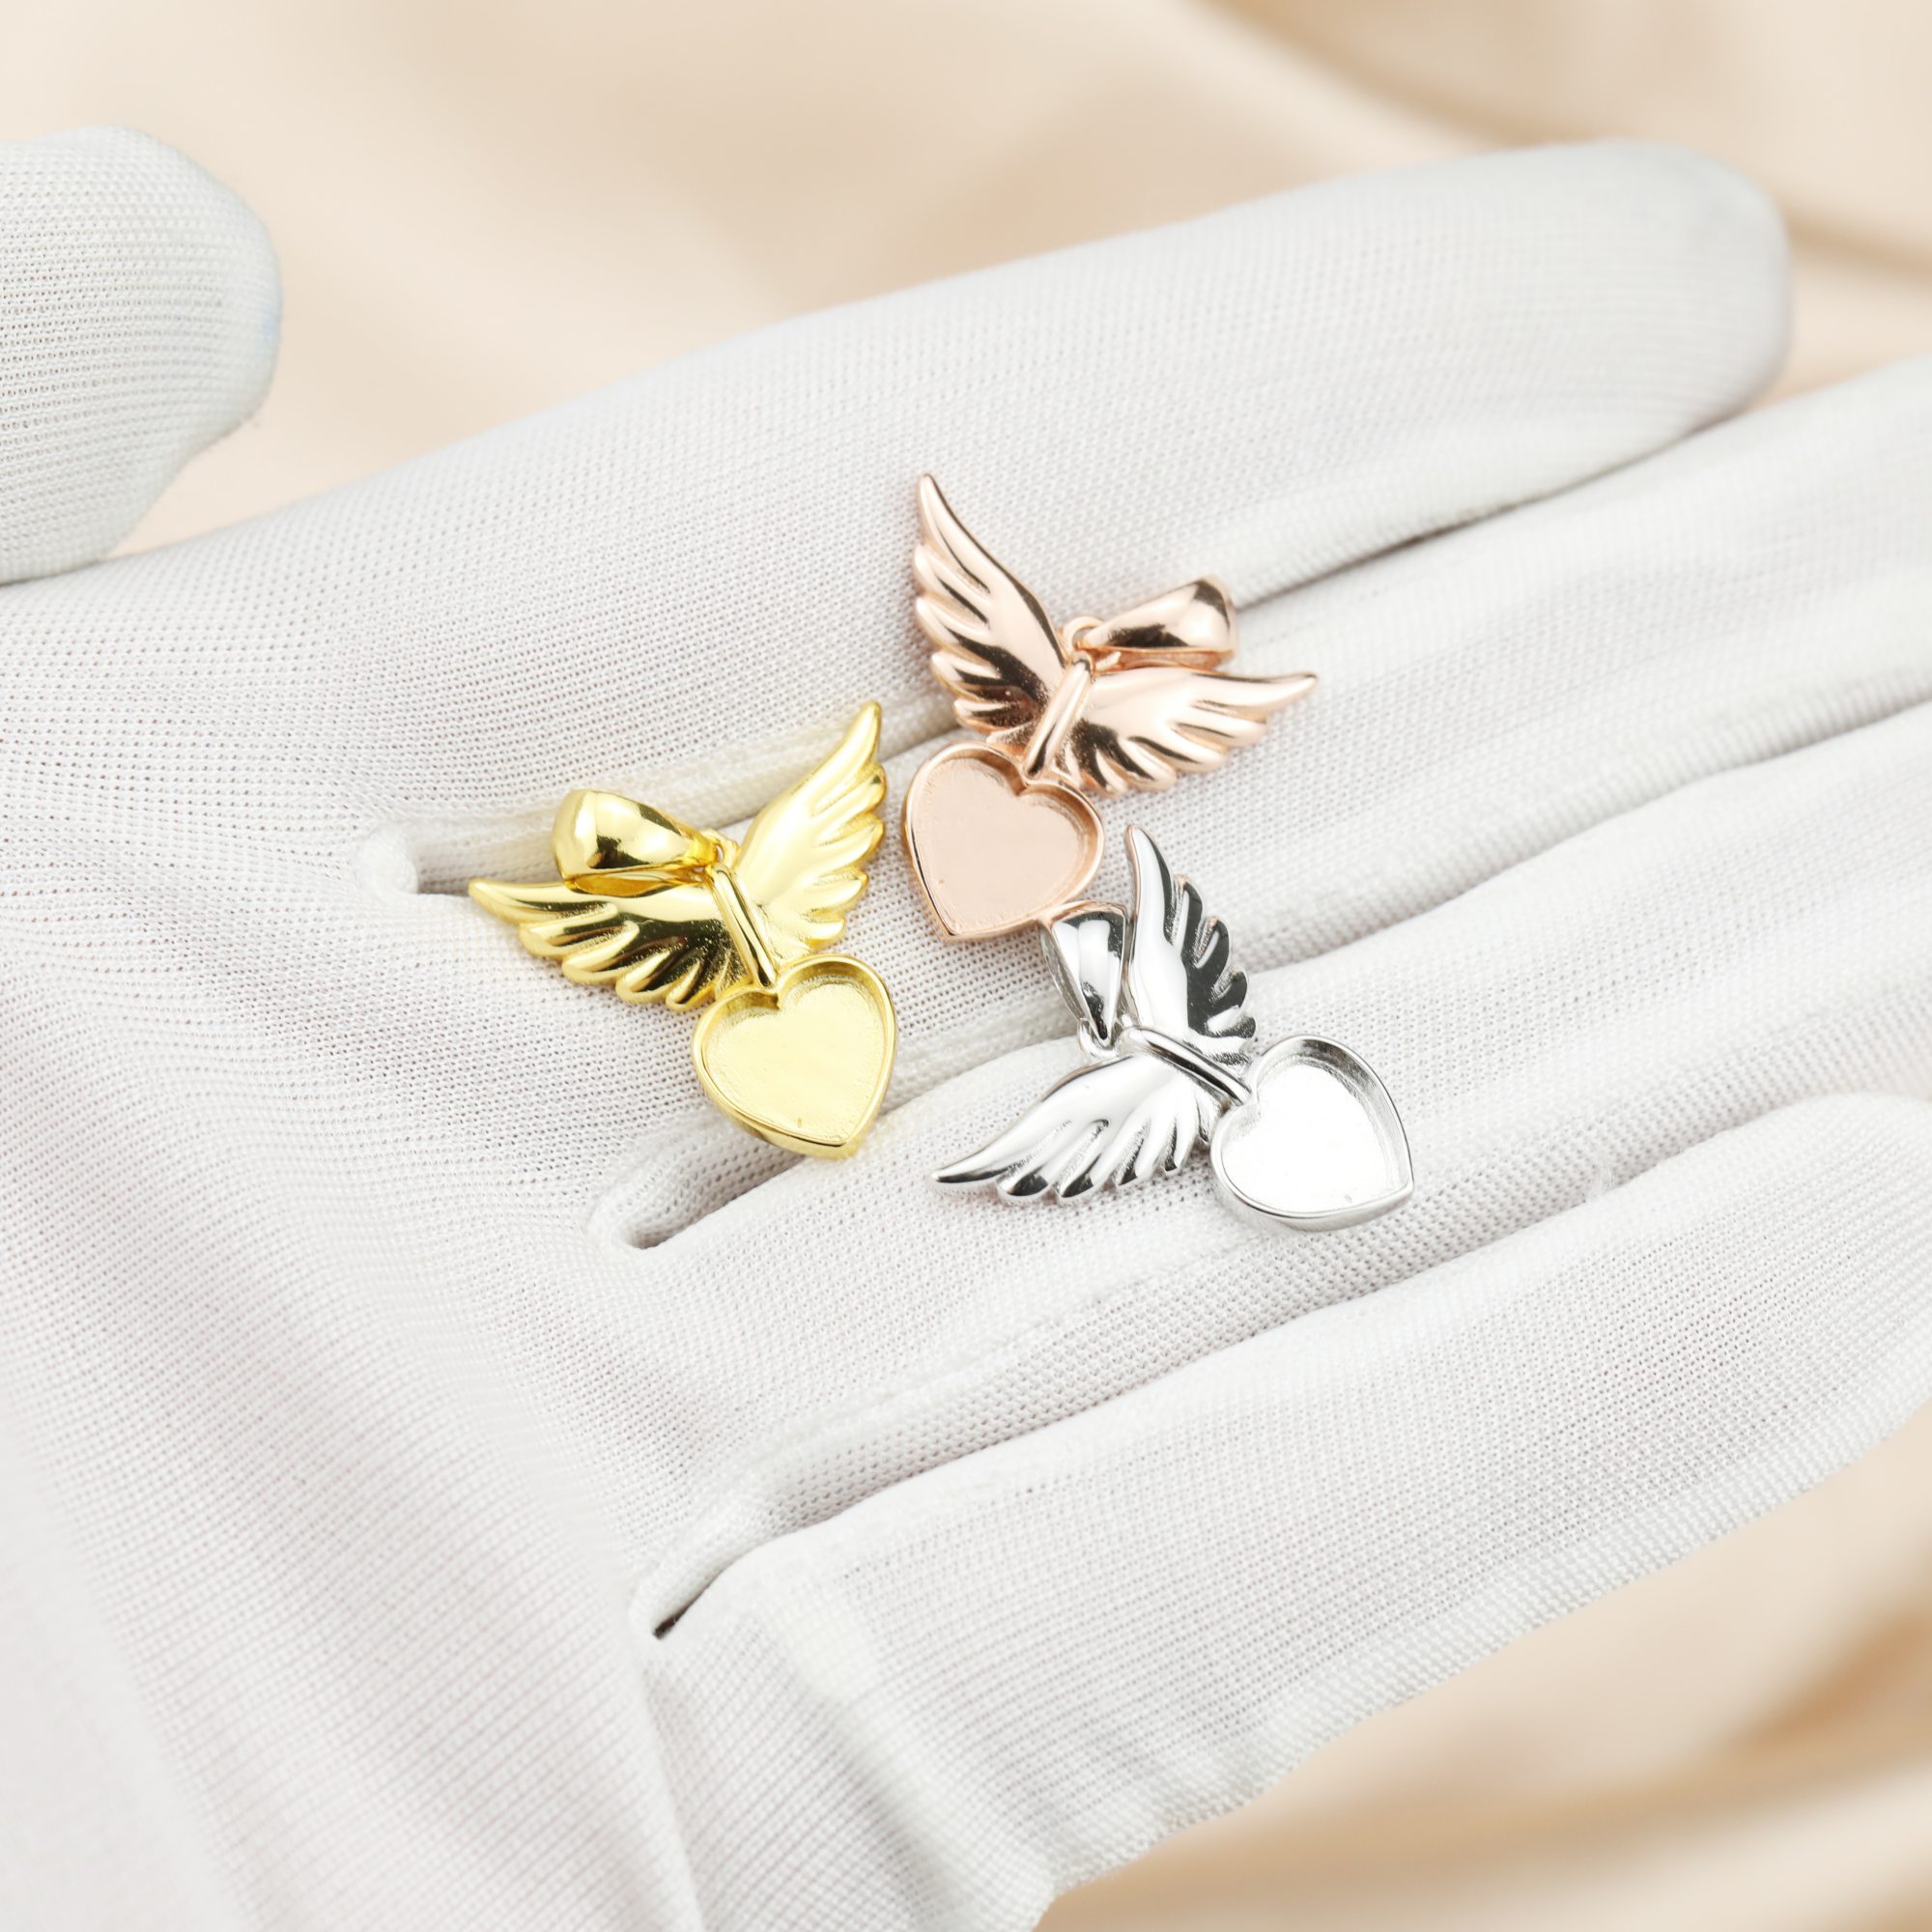 8MM Keepsake Breast Milk Resin Heart Angel Wing Pendant Prong Settings Mother Baby Solid 925 Sterling Silver Rose Gold Plated Charm Bezel 1431131 - Click Image to Close